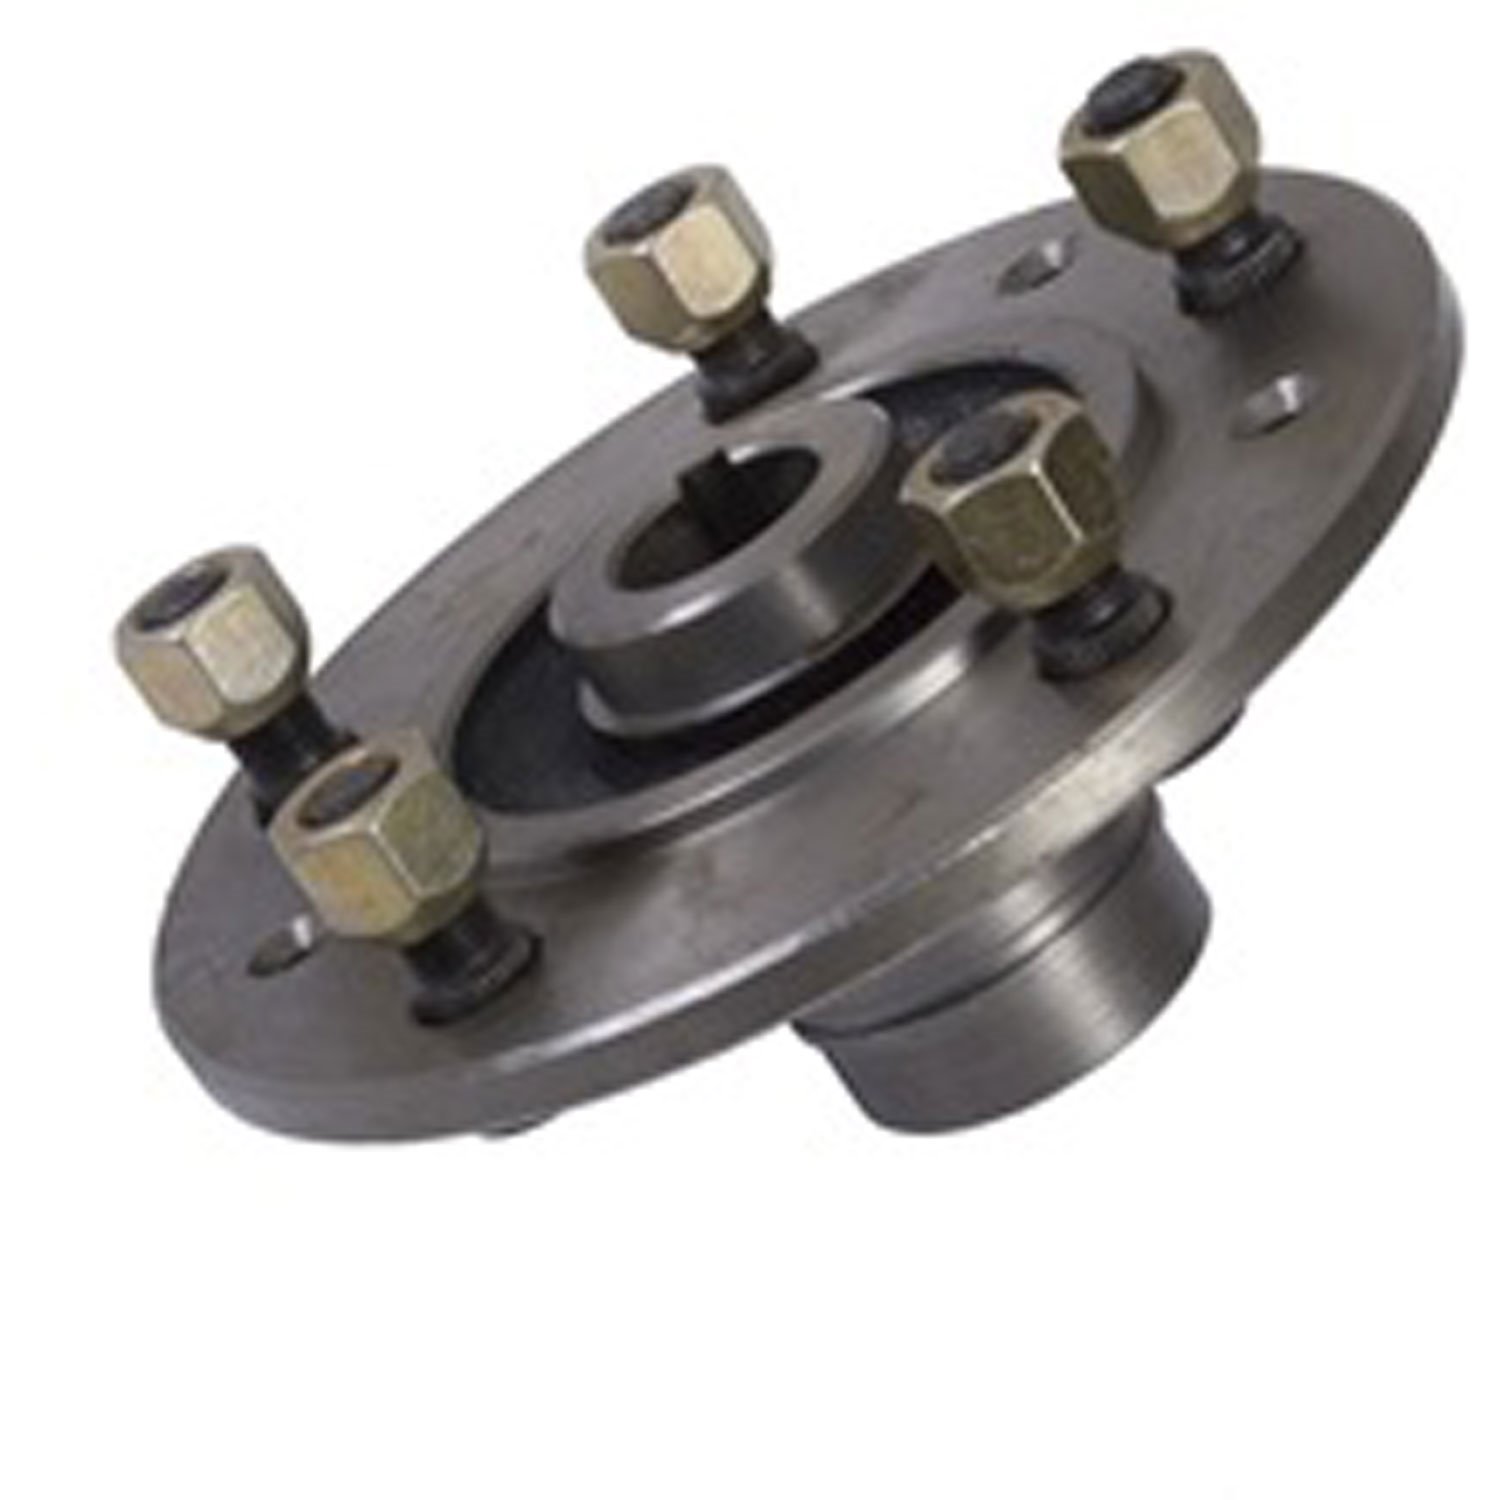 Rear Axle Hub for Dana 44 with Tapered Axles 1950-1971 Models